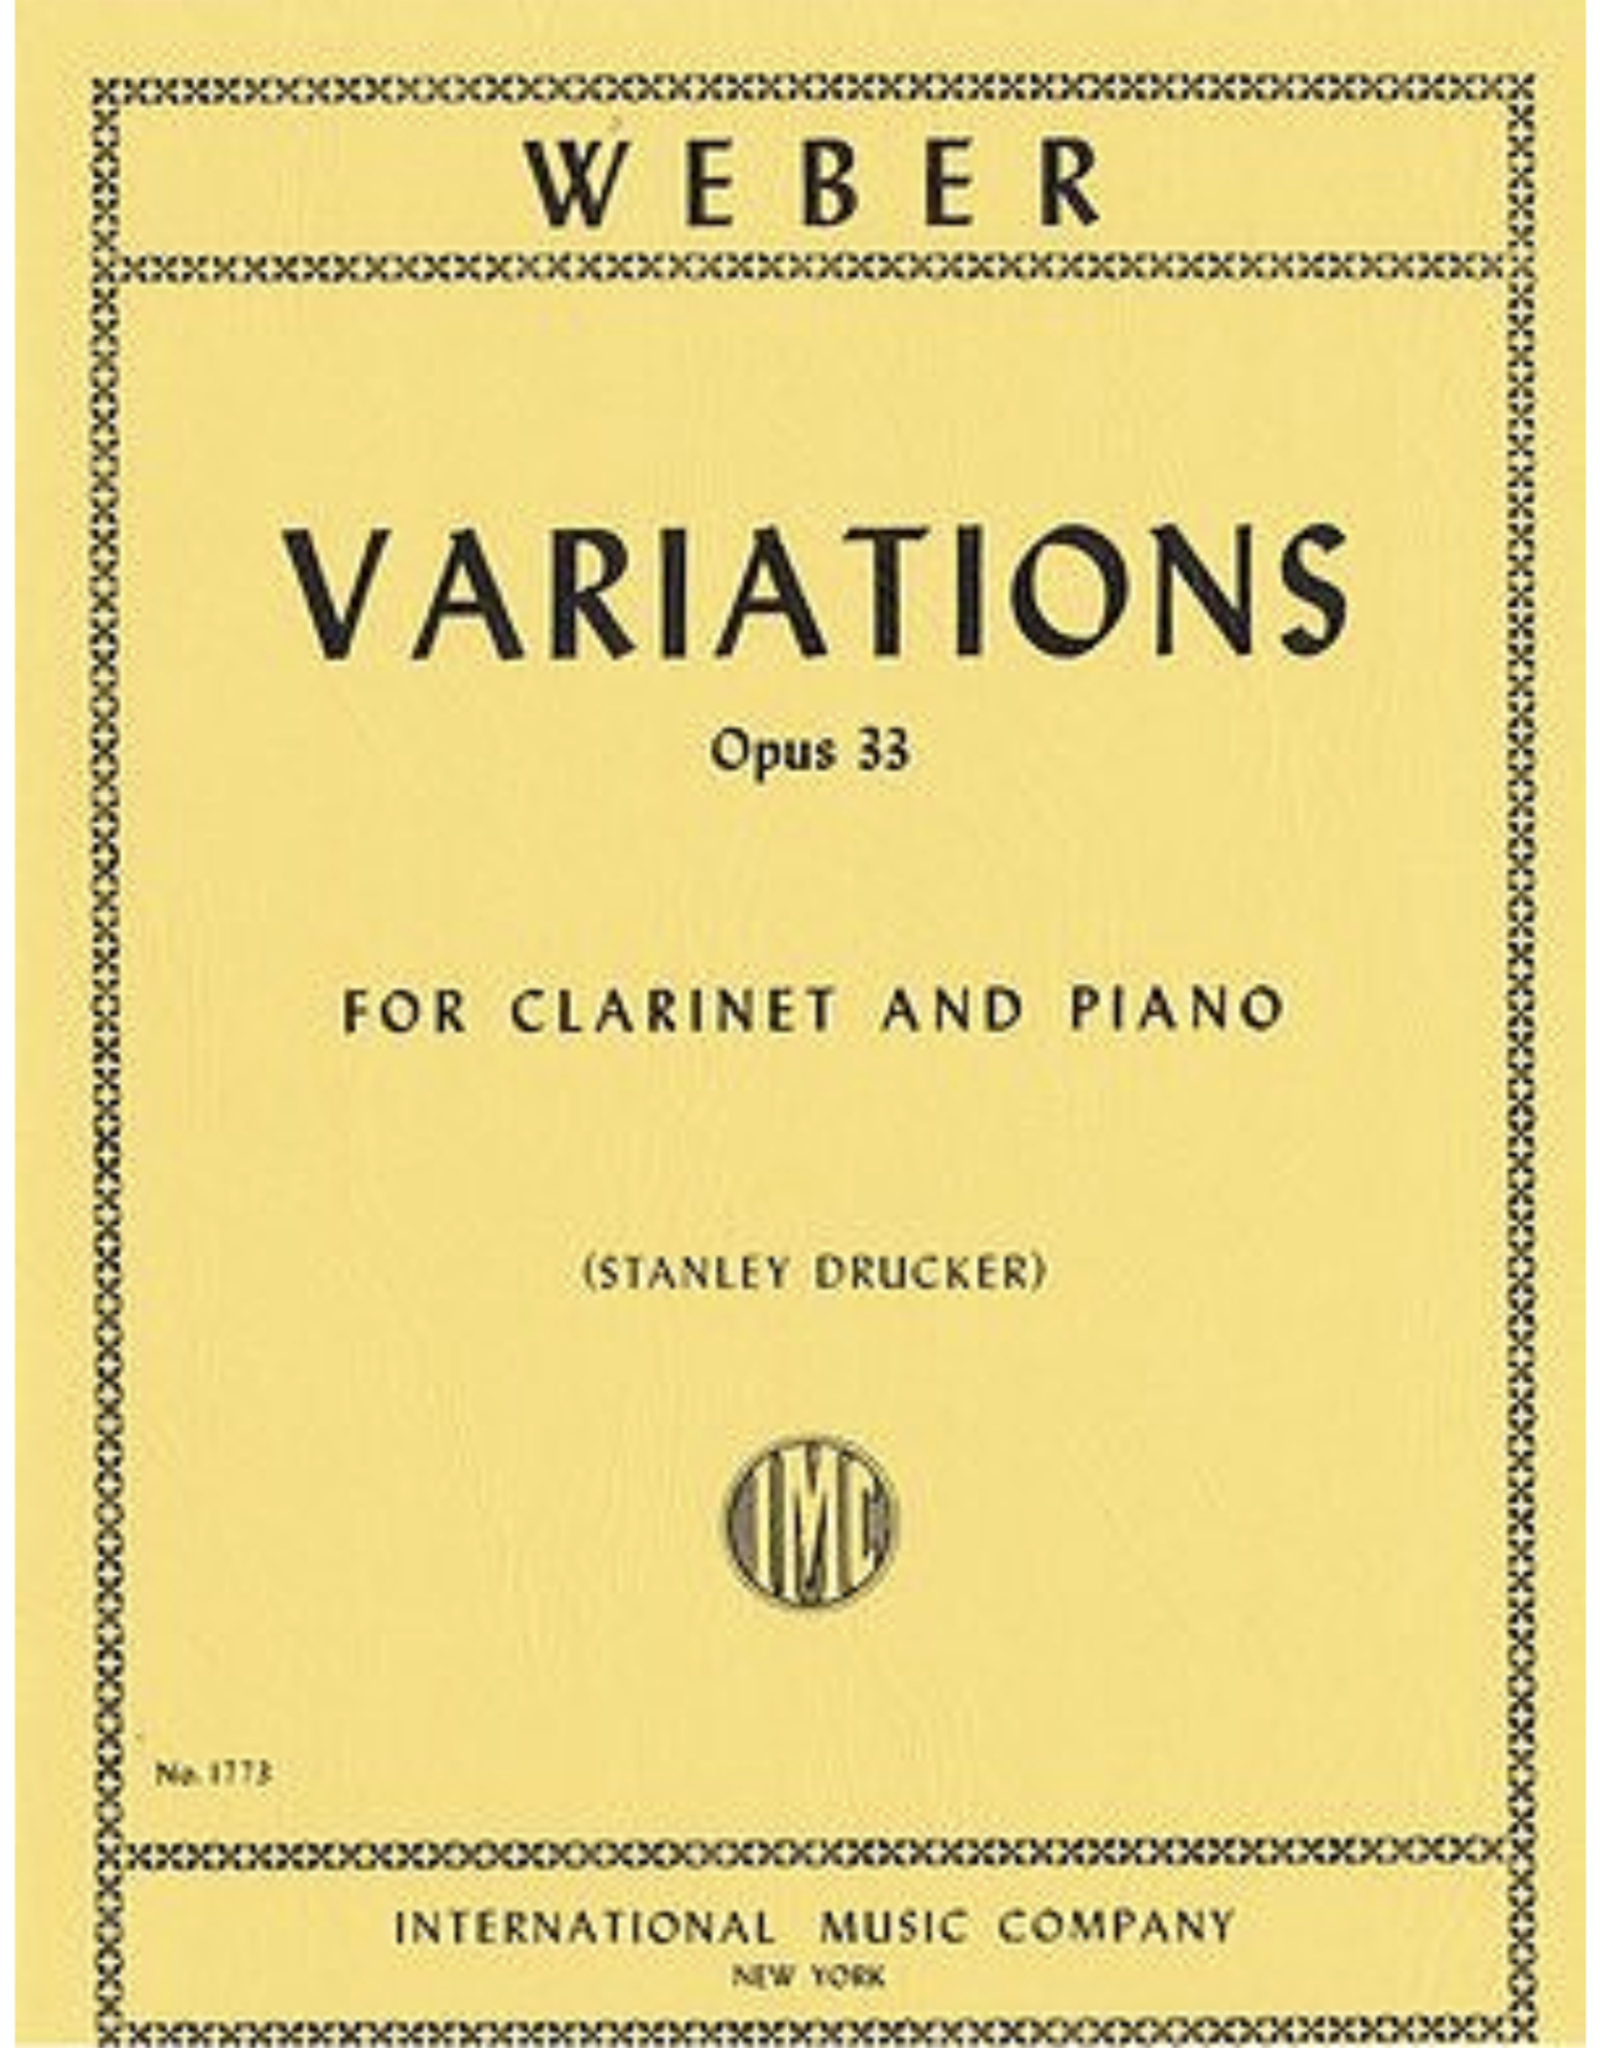 International Weber - Variations Op. 33 for Clarinet and Piano IMC No. 1773